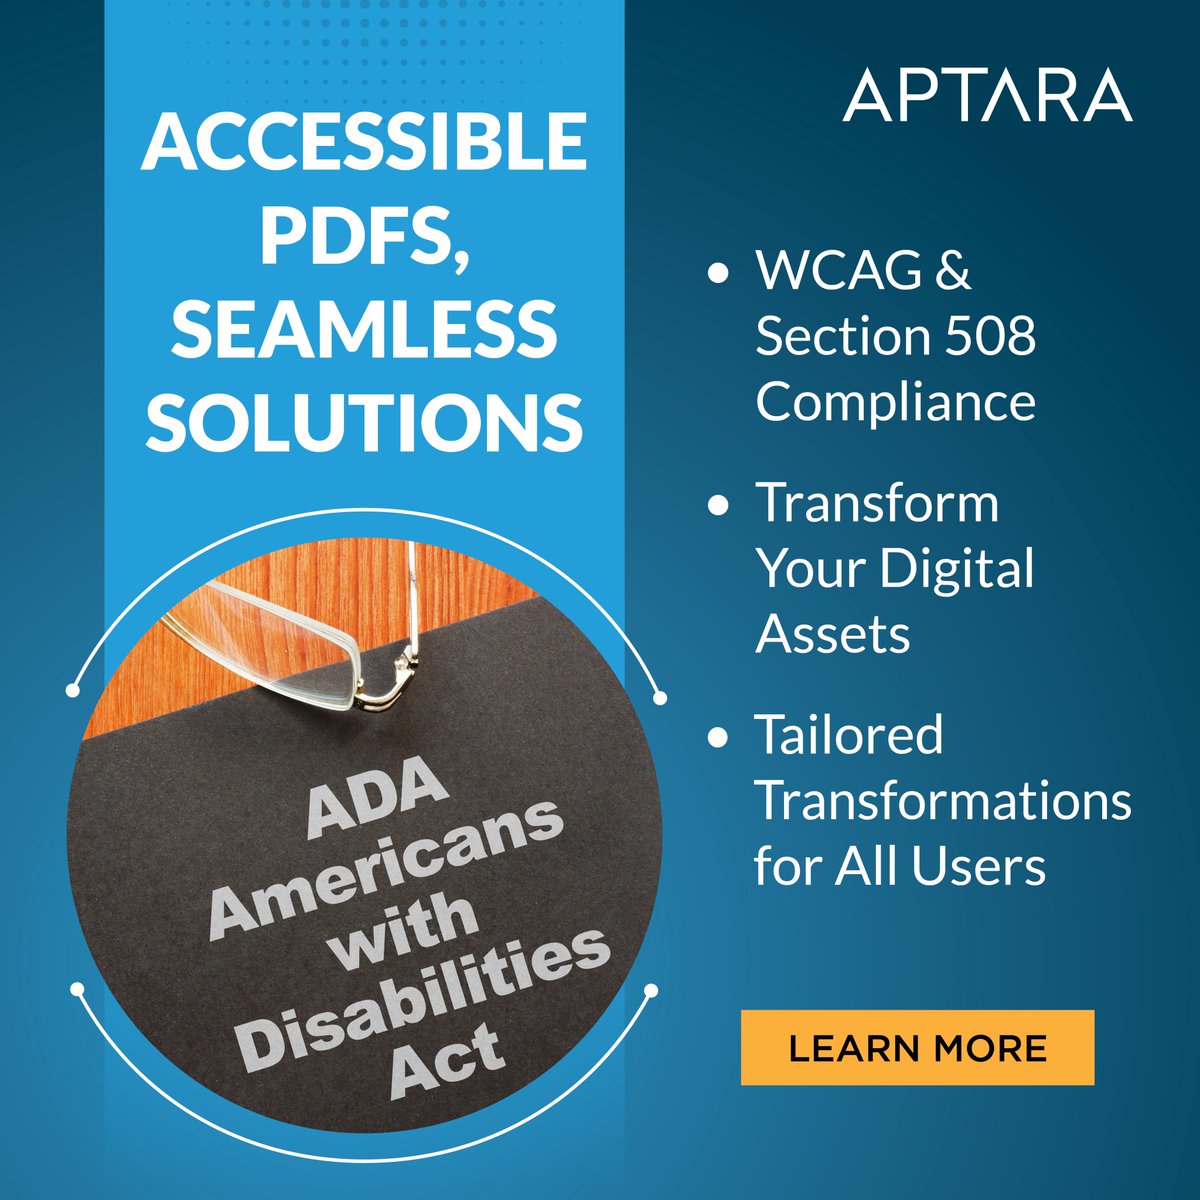 Empower inclusivity with accessible PDFs, ensuring compliance with WCAG & Section 508 standards. 
#Aptara #accessible #PDFs #inclusive #solutions #digital #transformation #WCAG #compliance #section508 #universal #access

aptaracorp.com/solutions/comp…